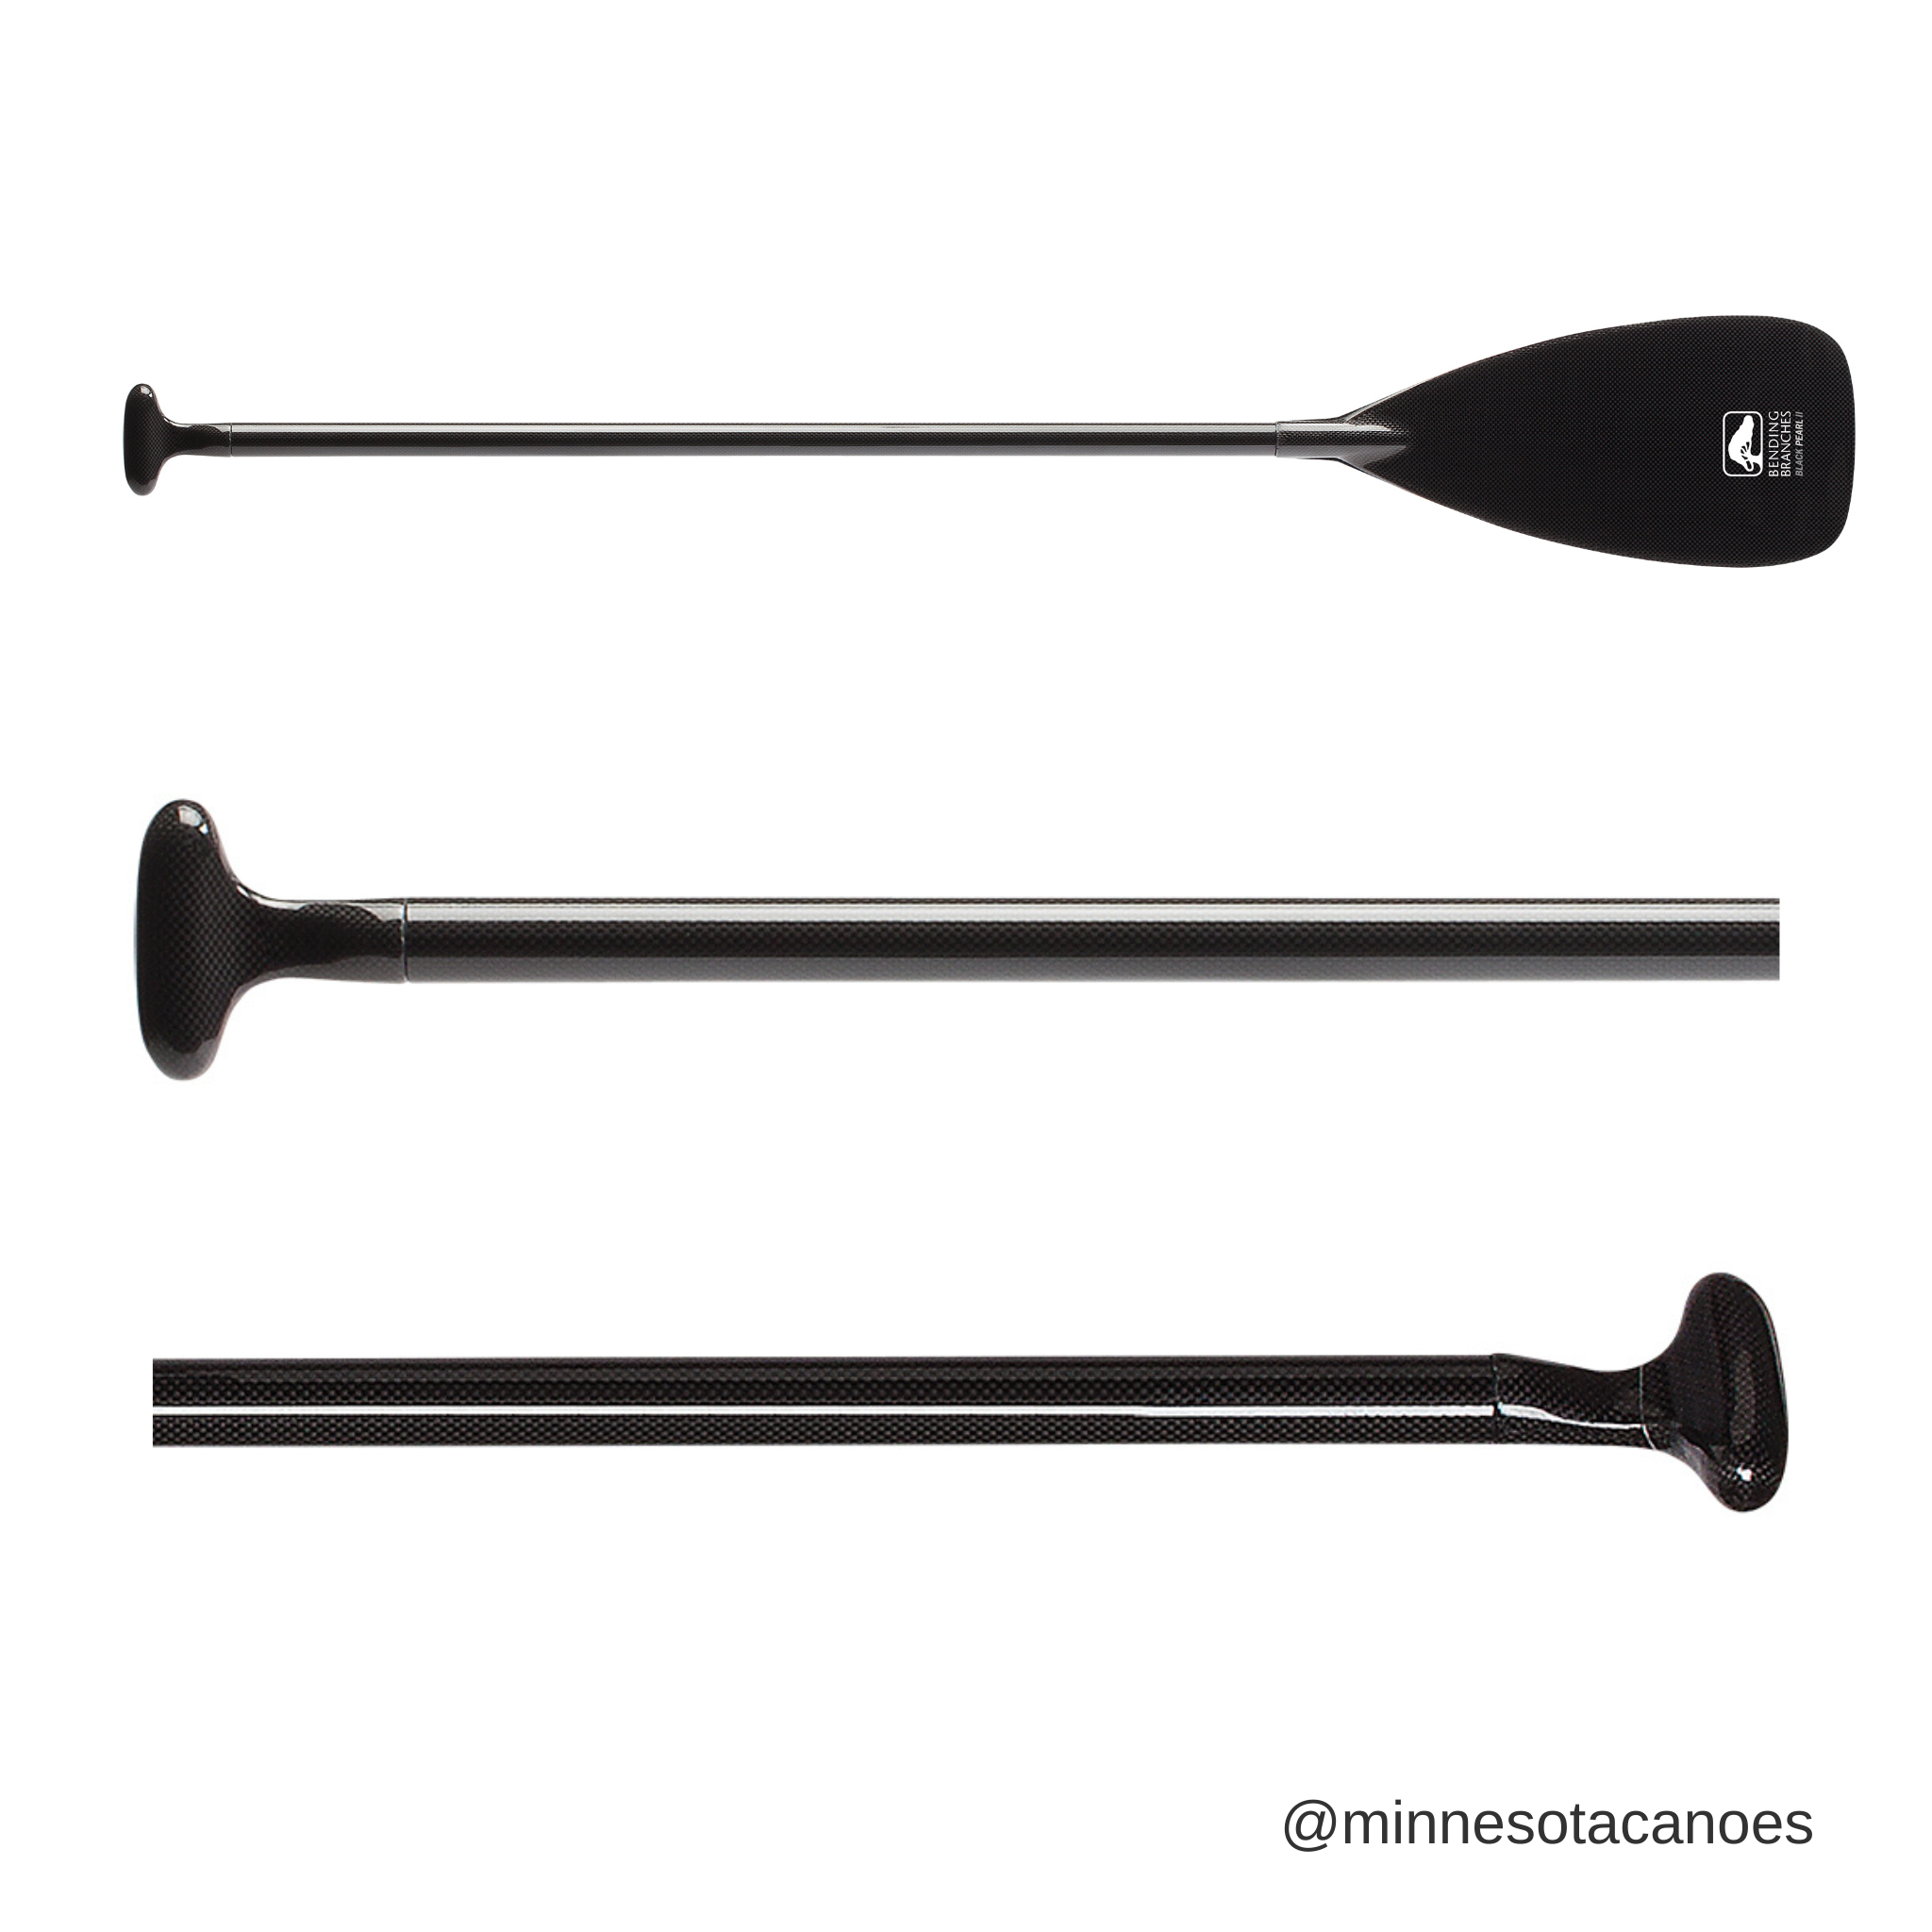 Carbon Bent Shaft Canoe Paddle (Bending Branches Black Pearl II)